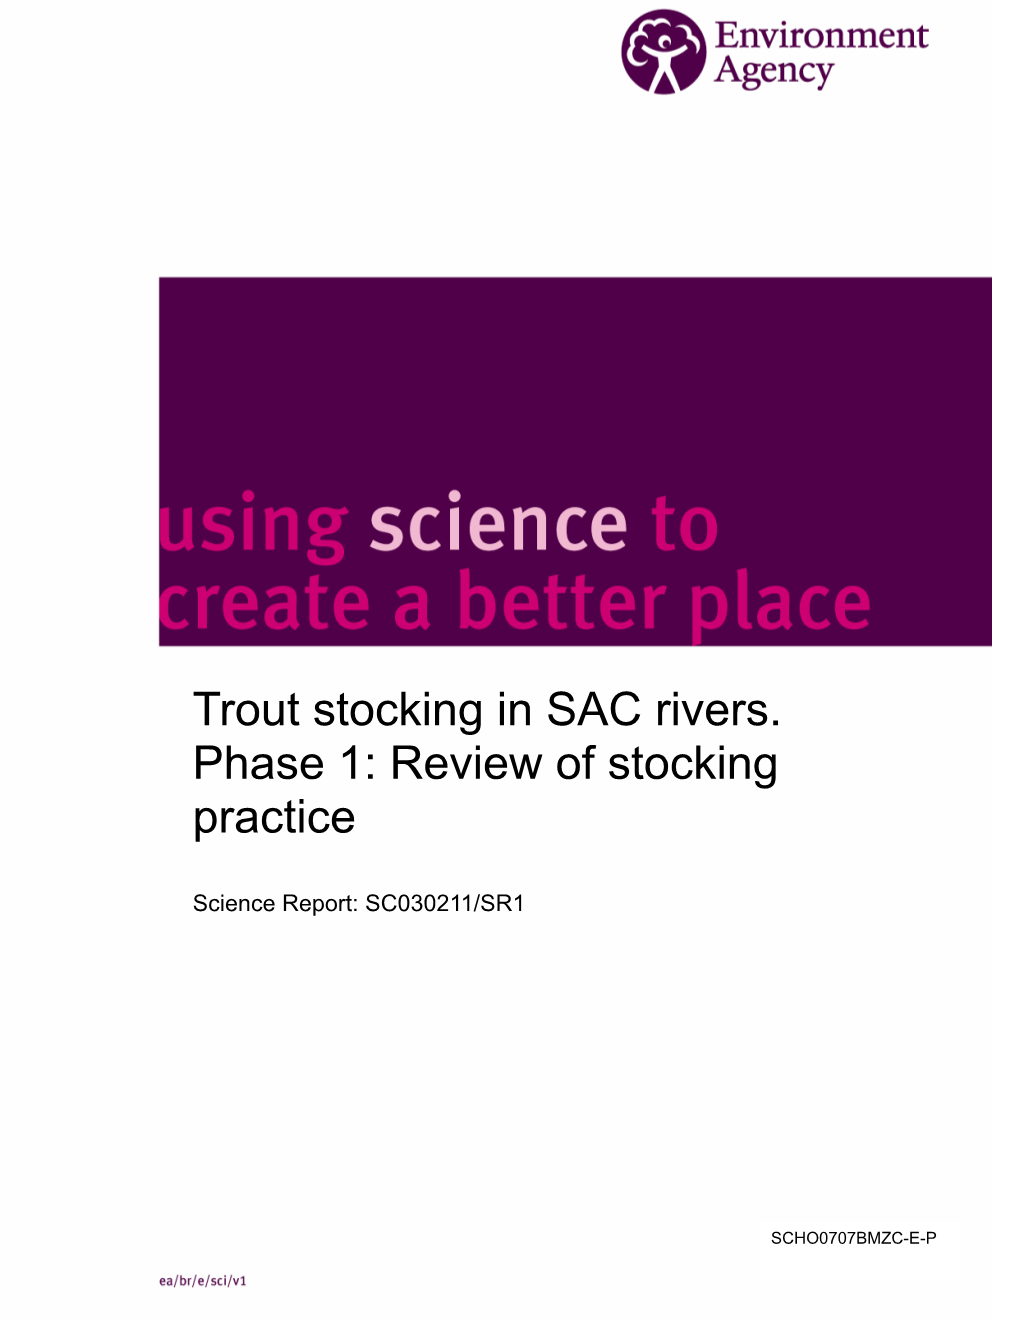 Trout Stocking in SAC Rivers. Phase 1: Review of Stocking Practice